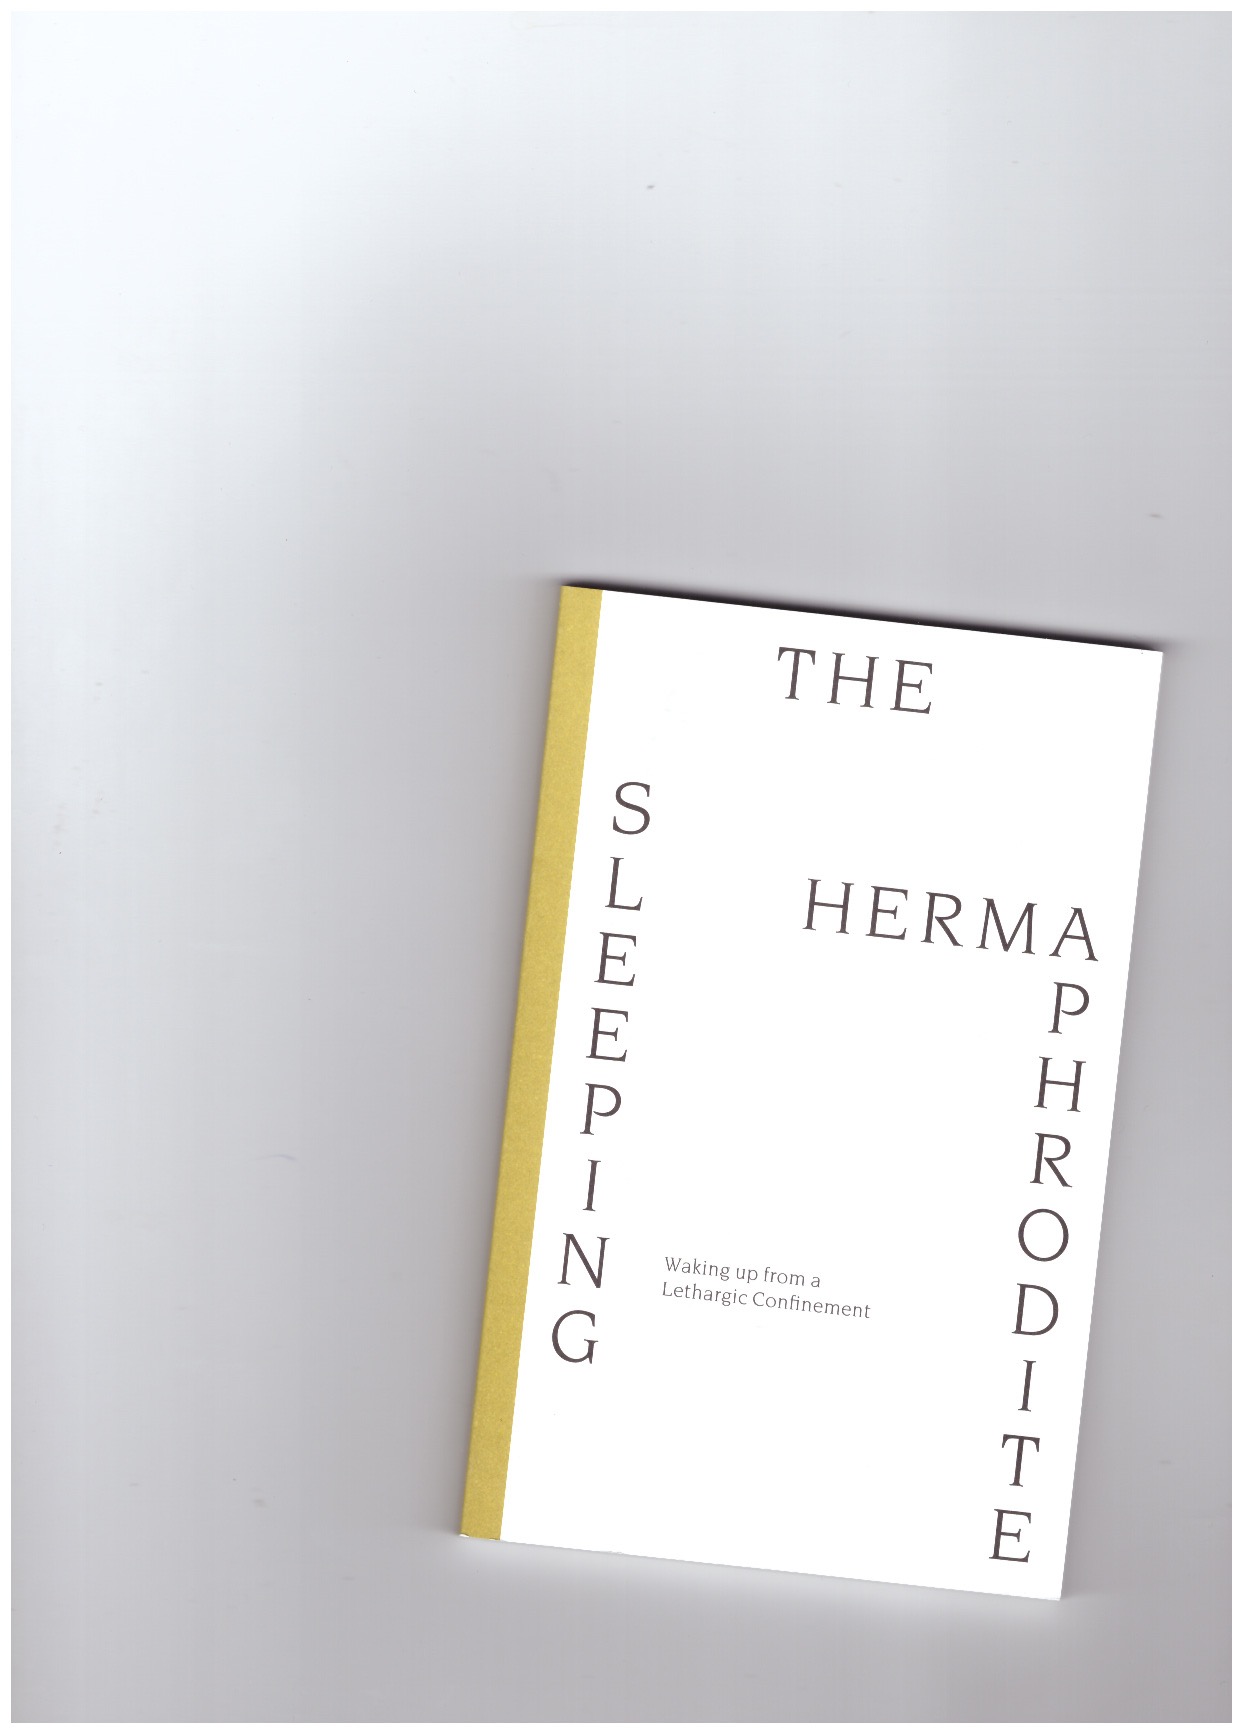 BERGÉ, David (ed.) - The Sleeping Hermaphrodite. Waking up from a Lethargic Confinement